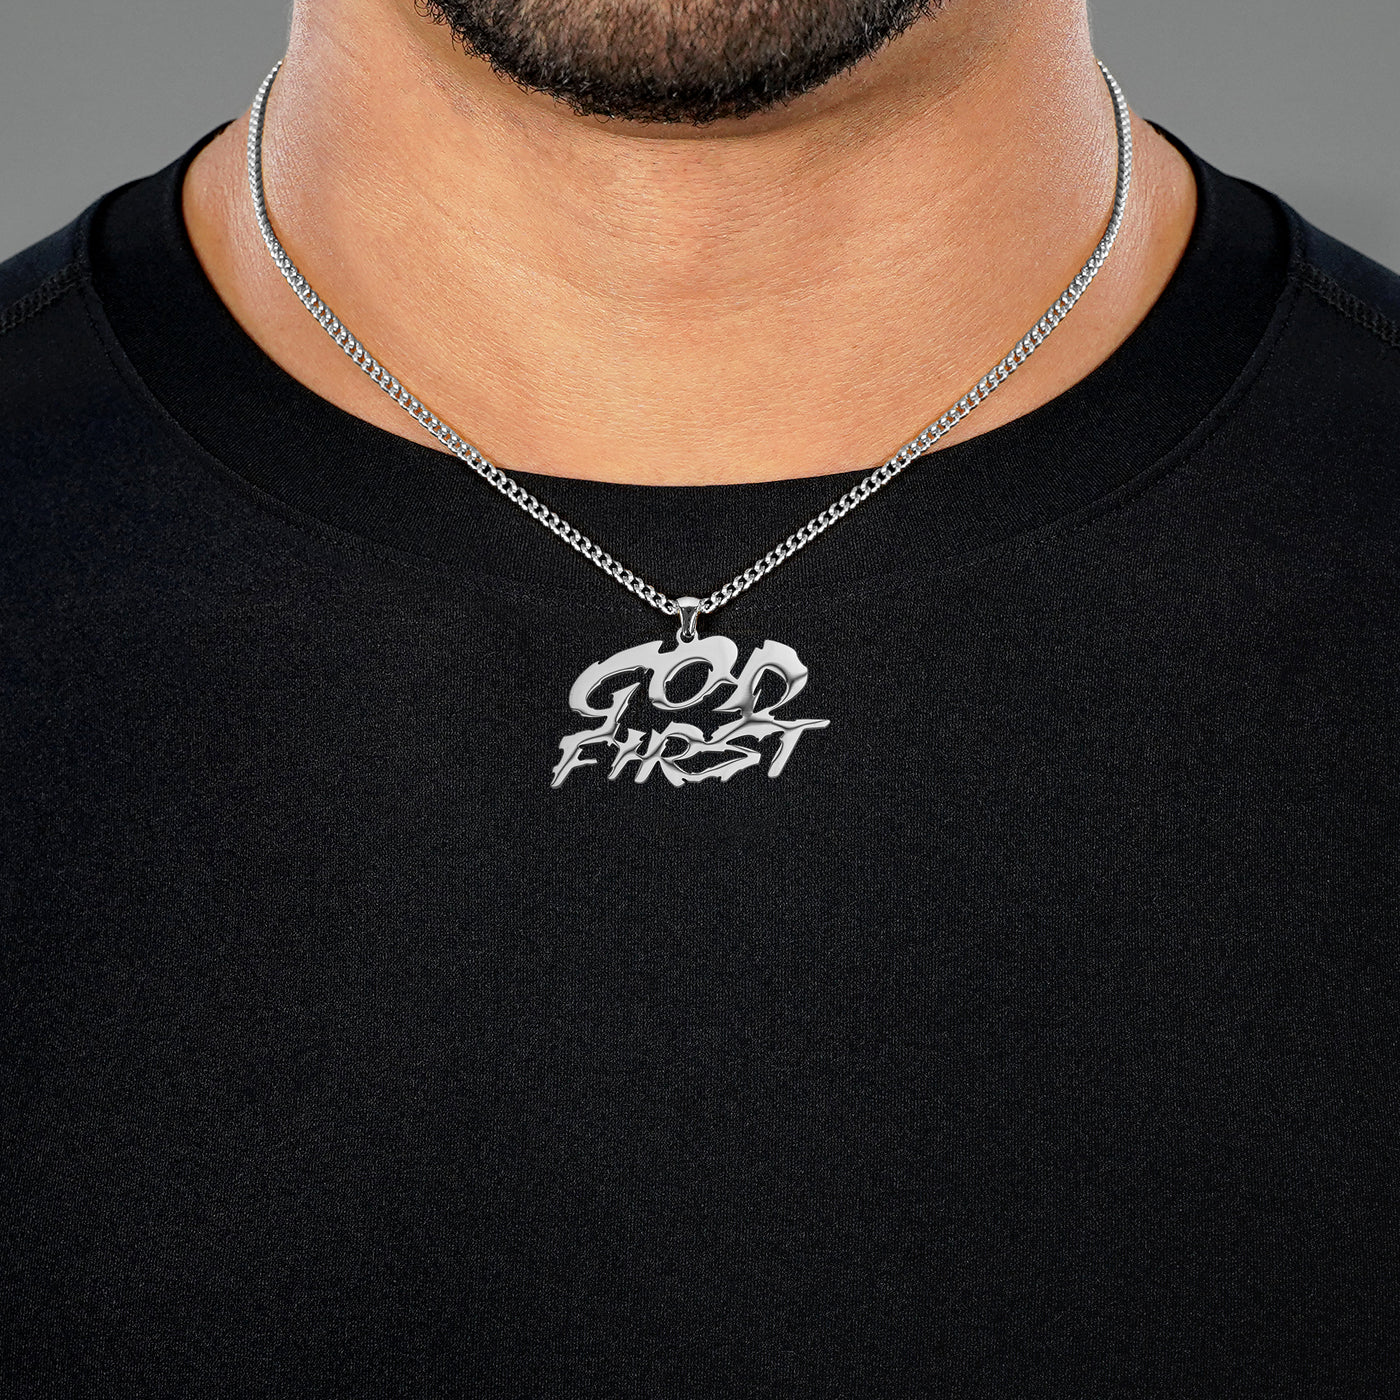 God First Pendant with Chain Necklace - Stainless Steel